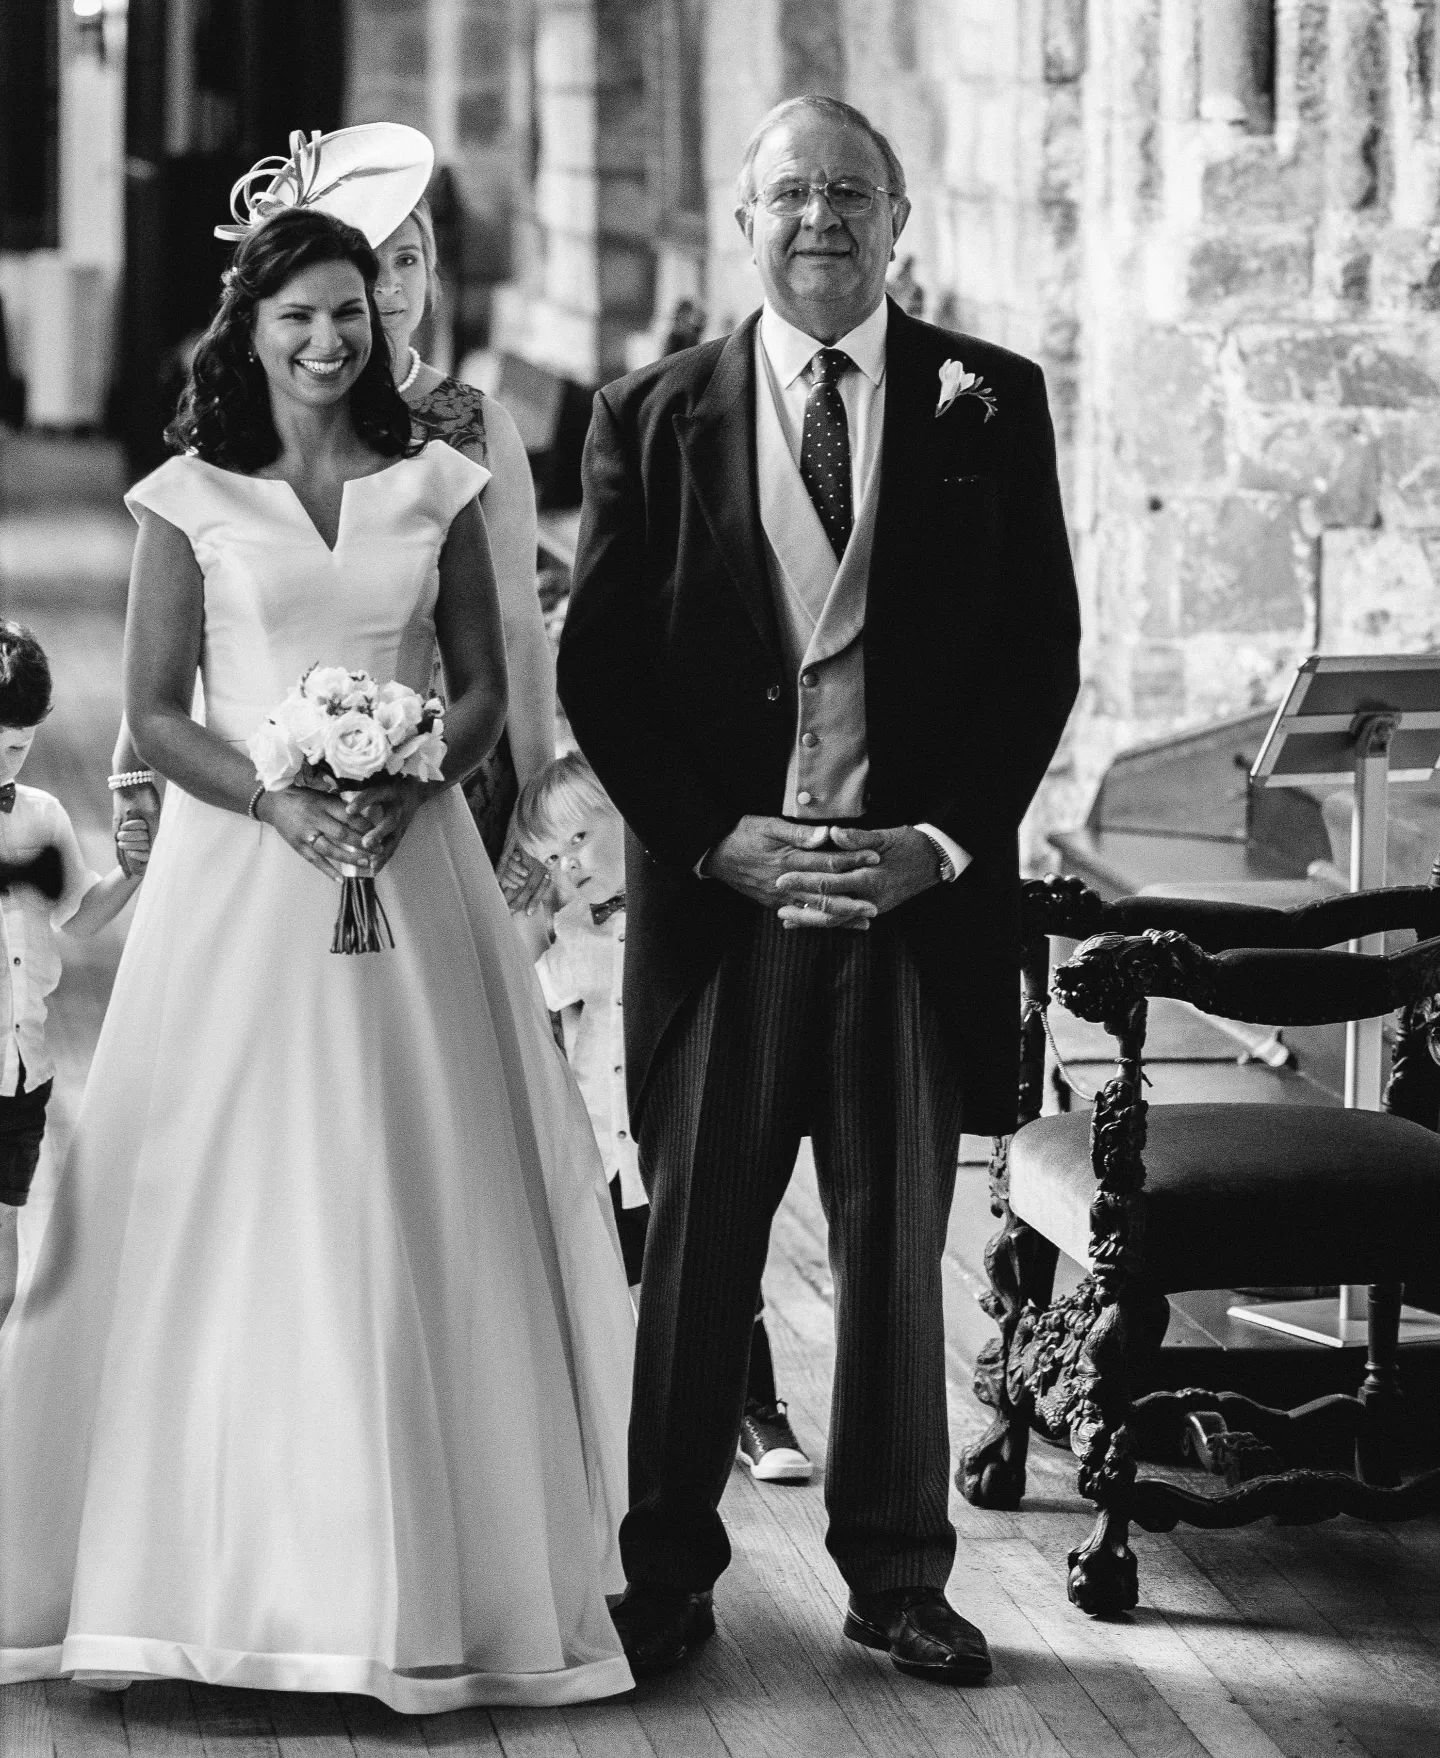 Anne-Marie and her father just about to walk down the aisle at Durham Castle.

#durhamcastlewedding
#durhamcastle
#durhamweddings
#durhamweddingphotographer
#blackandwhitewedding
#documentaryweddingphotography
#candidweddingphotos
#bride
#bridalgown